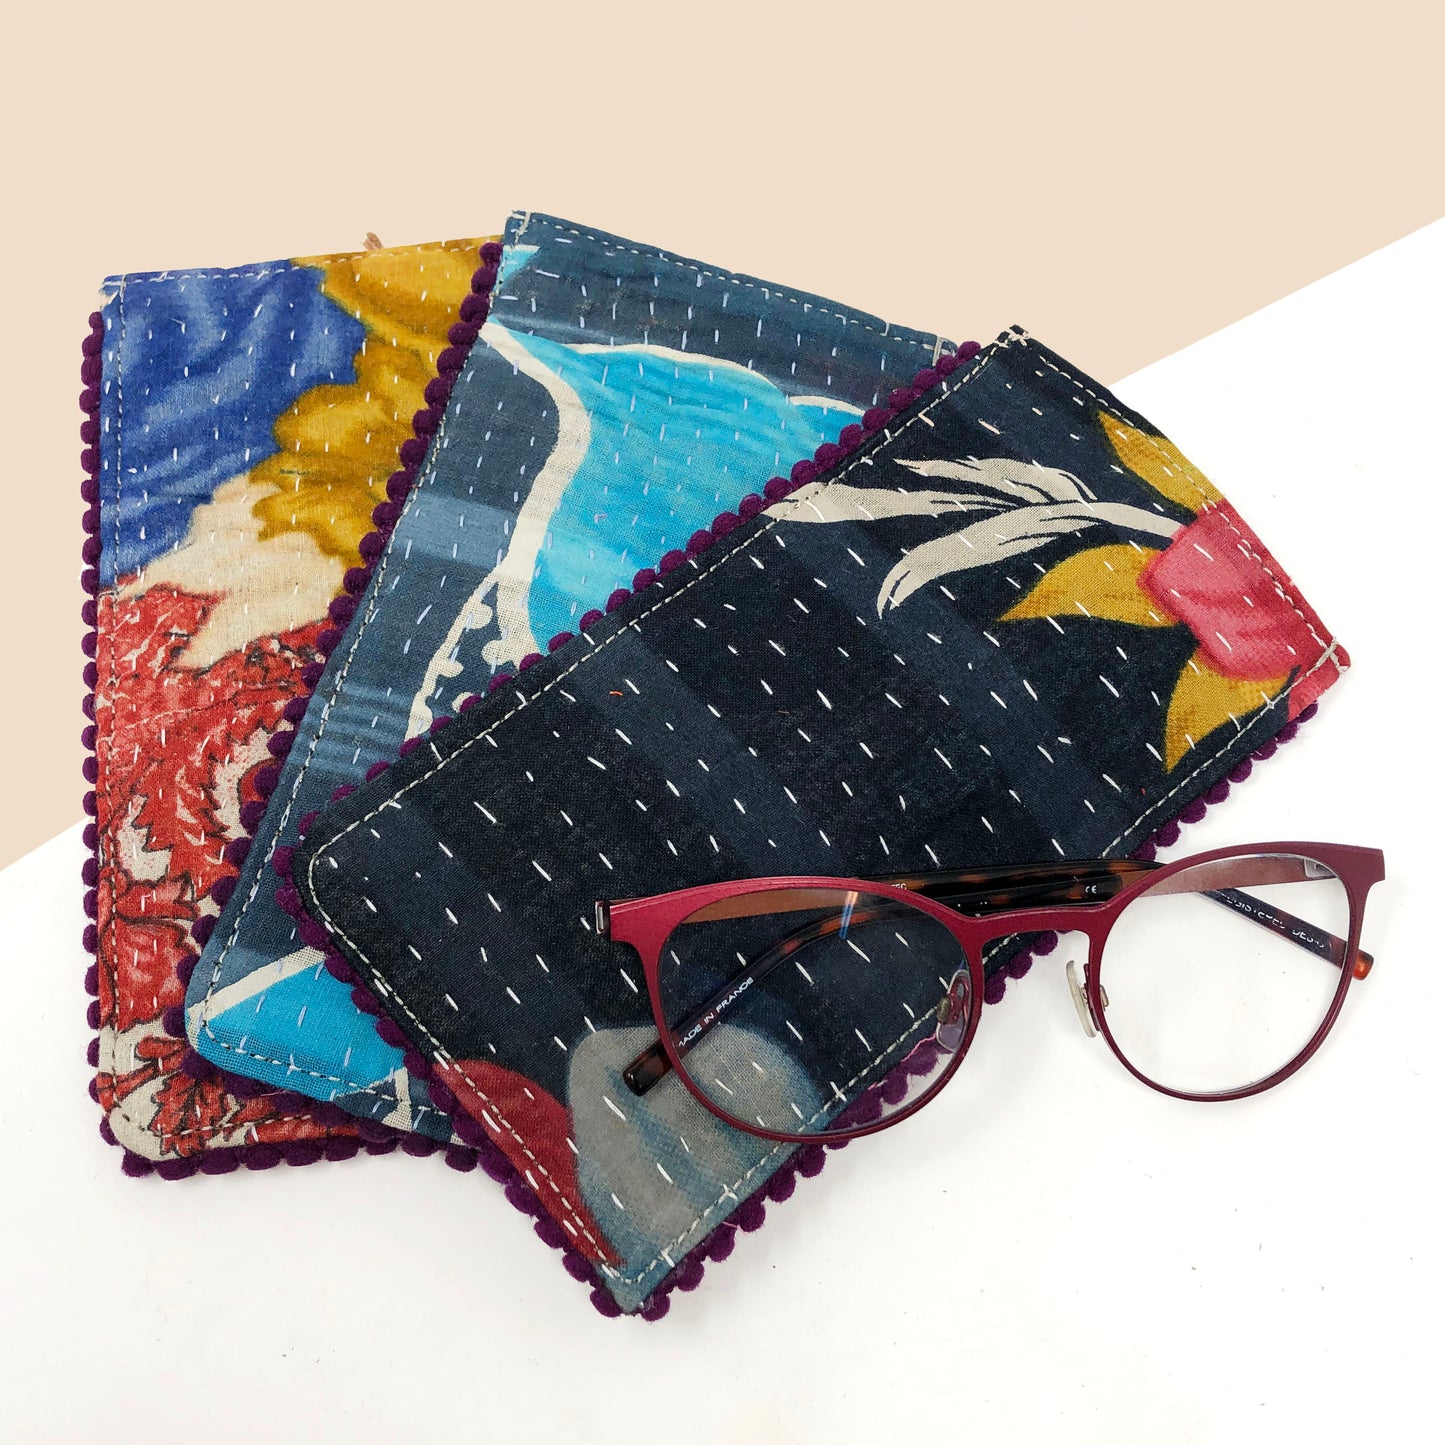 Three soft glasses cases are fanned out with a pair of glasses placed atop them.